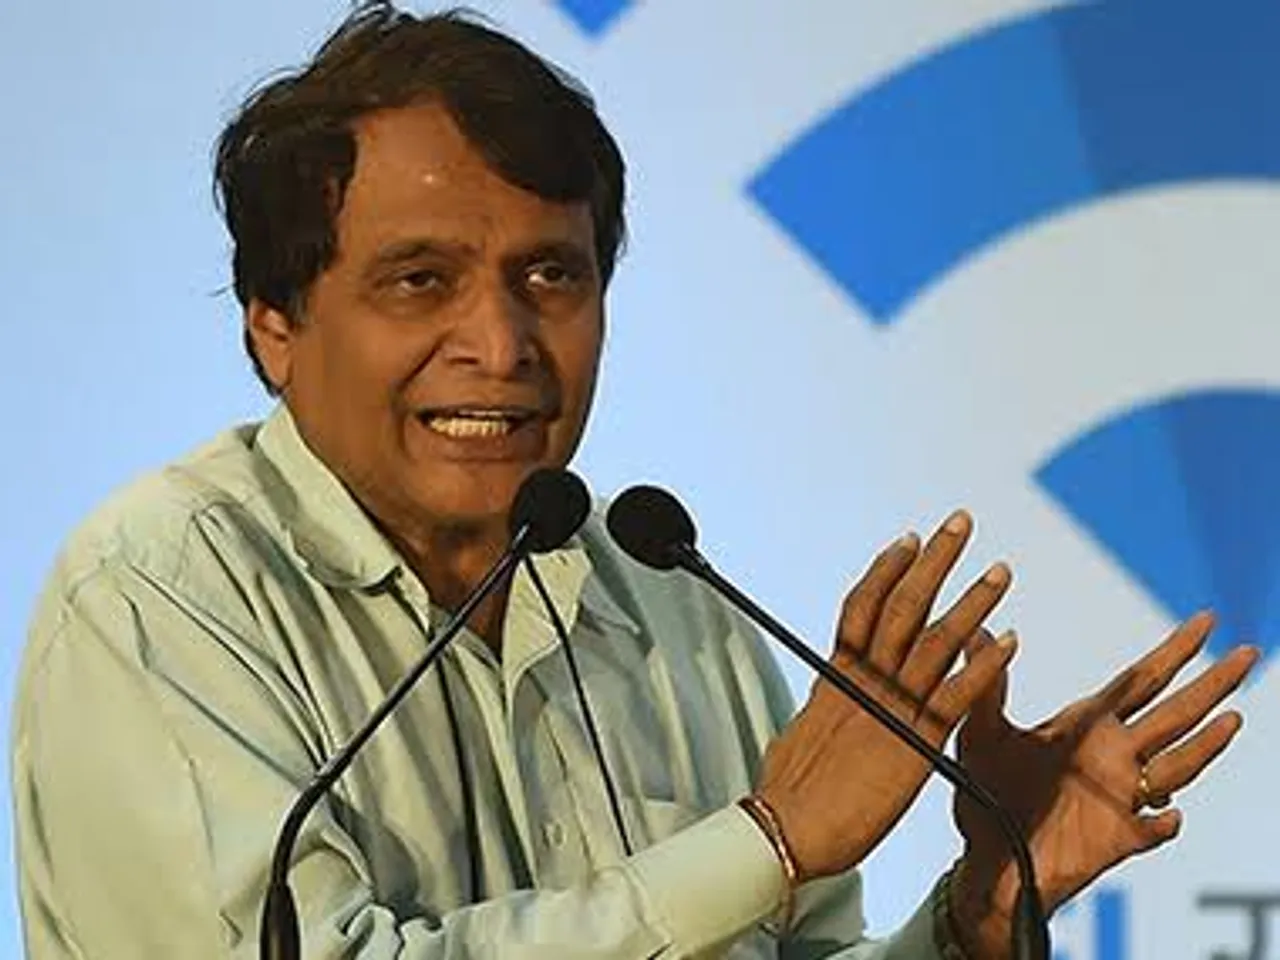 Make in India can be a Game Changer Program for India's Aviation Sector: Suresh Prabhu